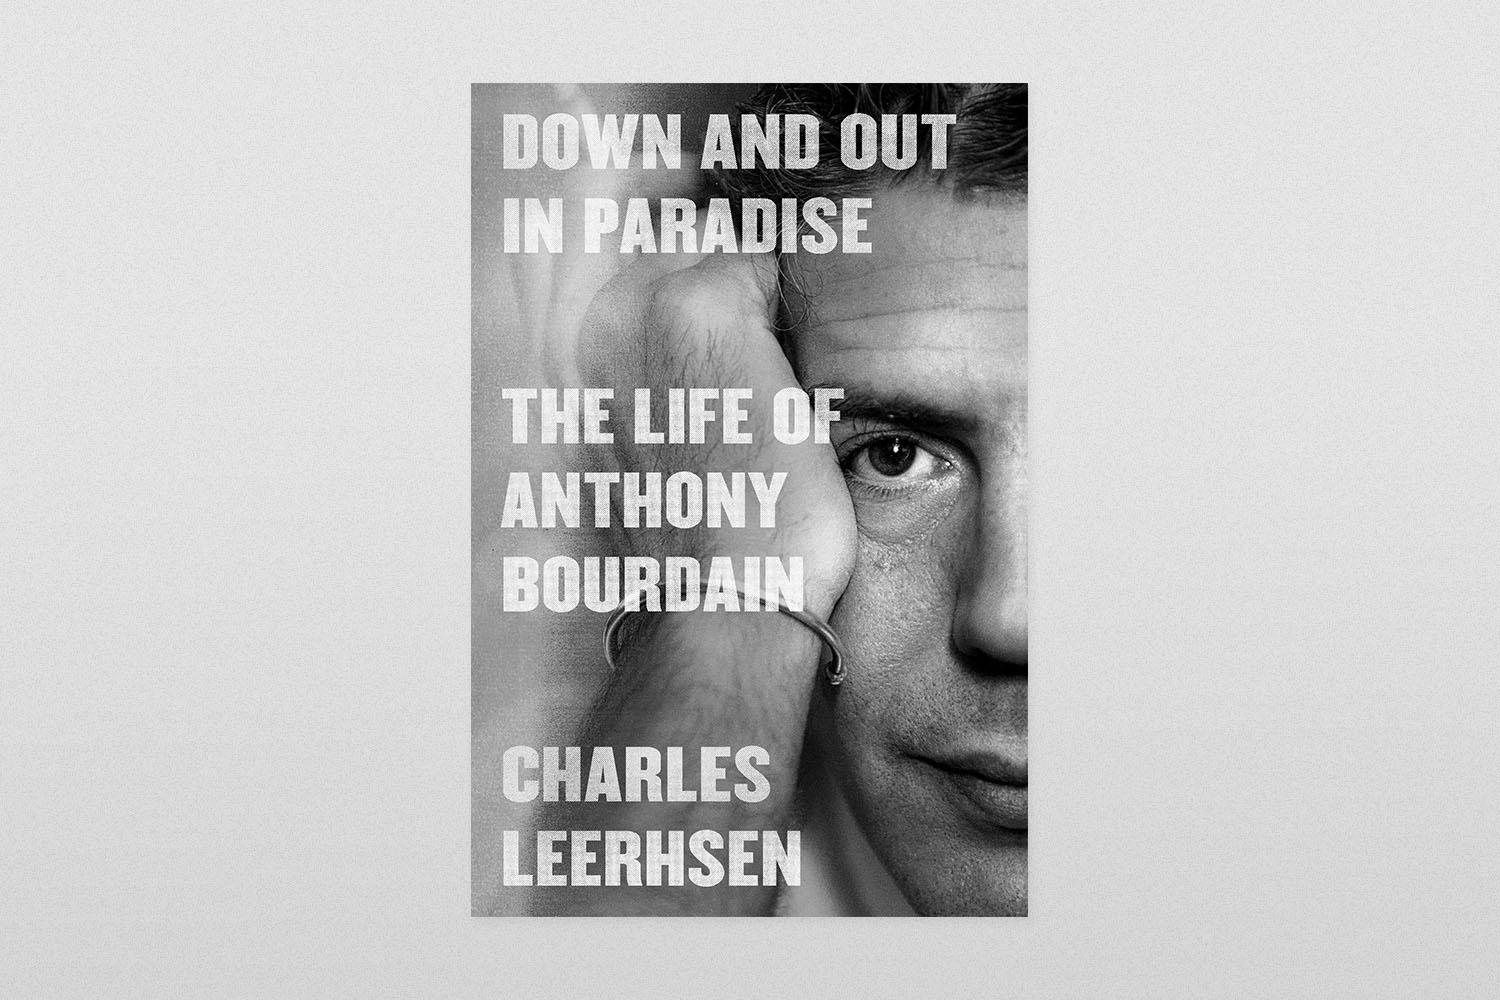 Down and Out in Paradise- The Life of Anthony Bourdain